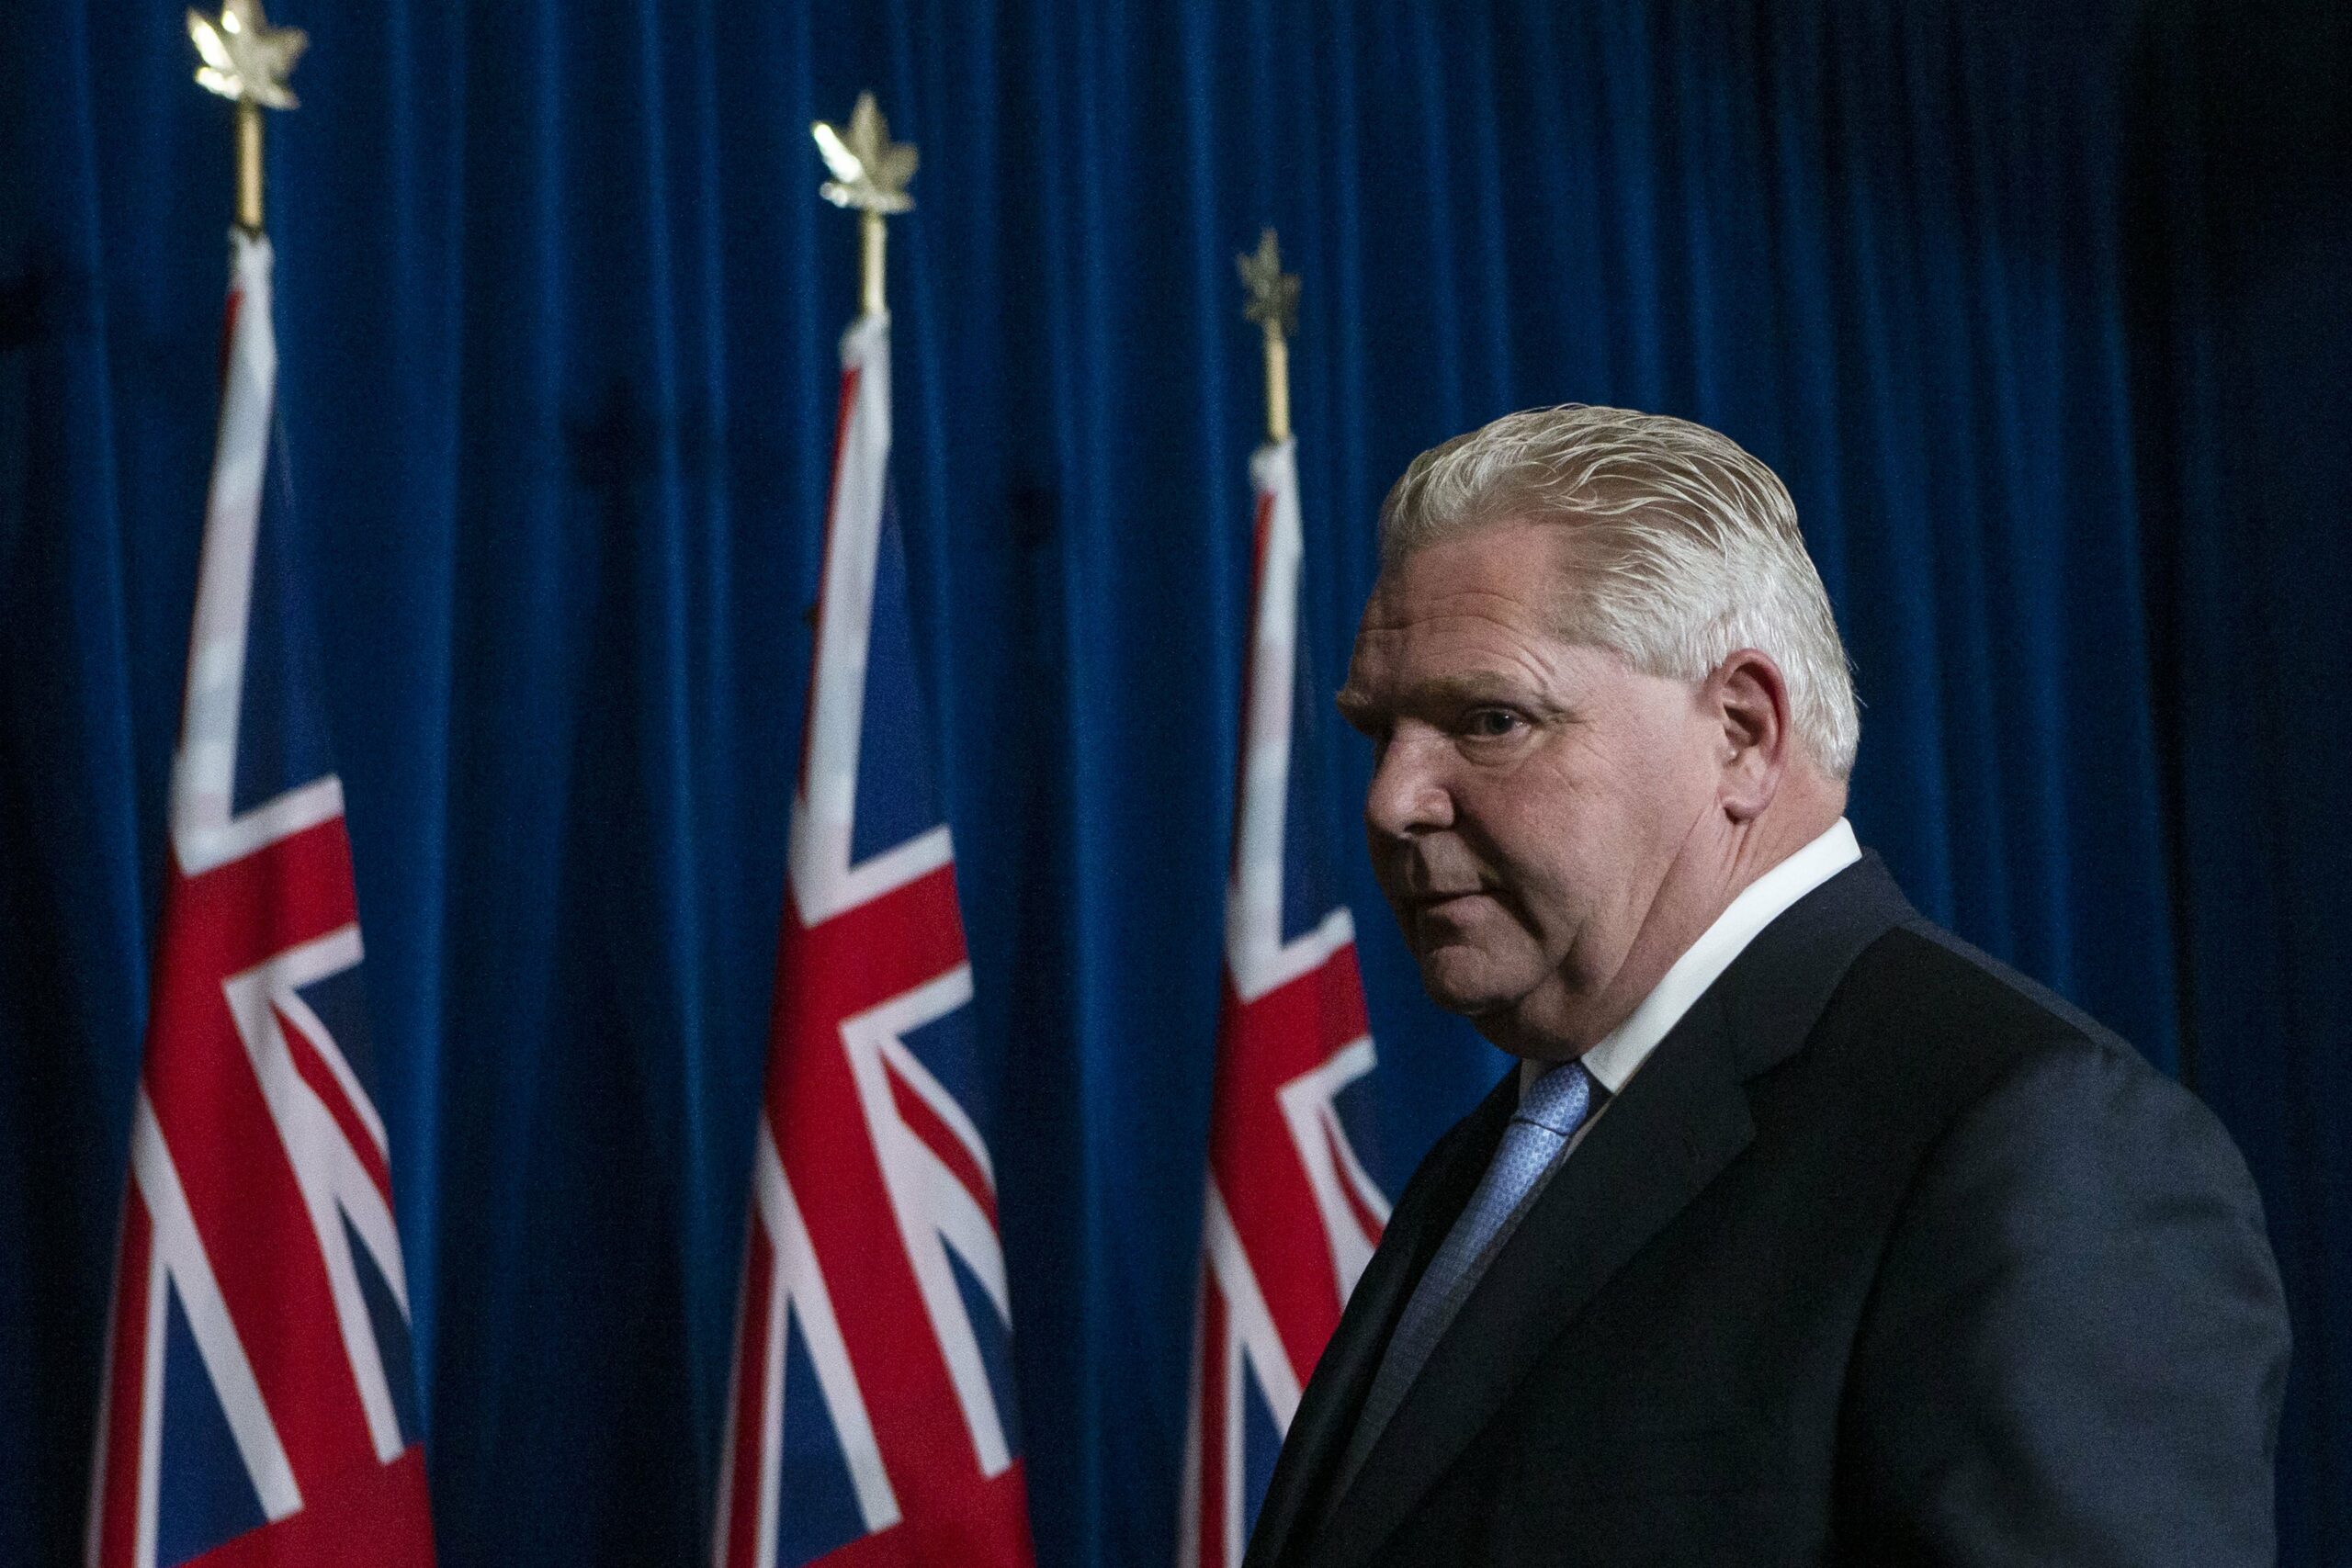 Ford said he would yank COVID vax passes, mandates mid-convoy: PMO email